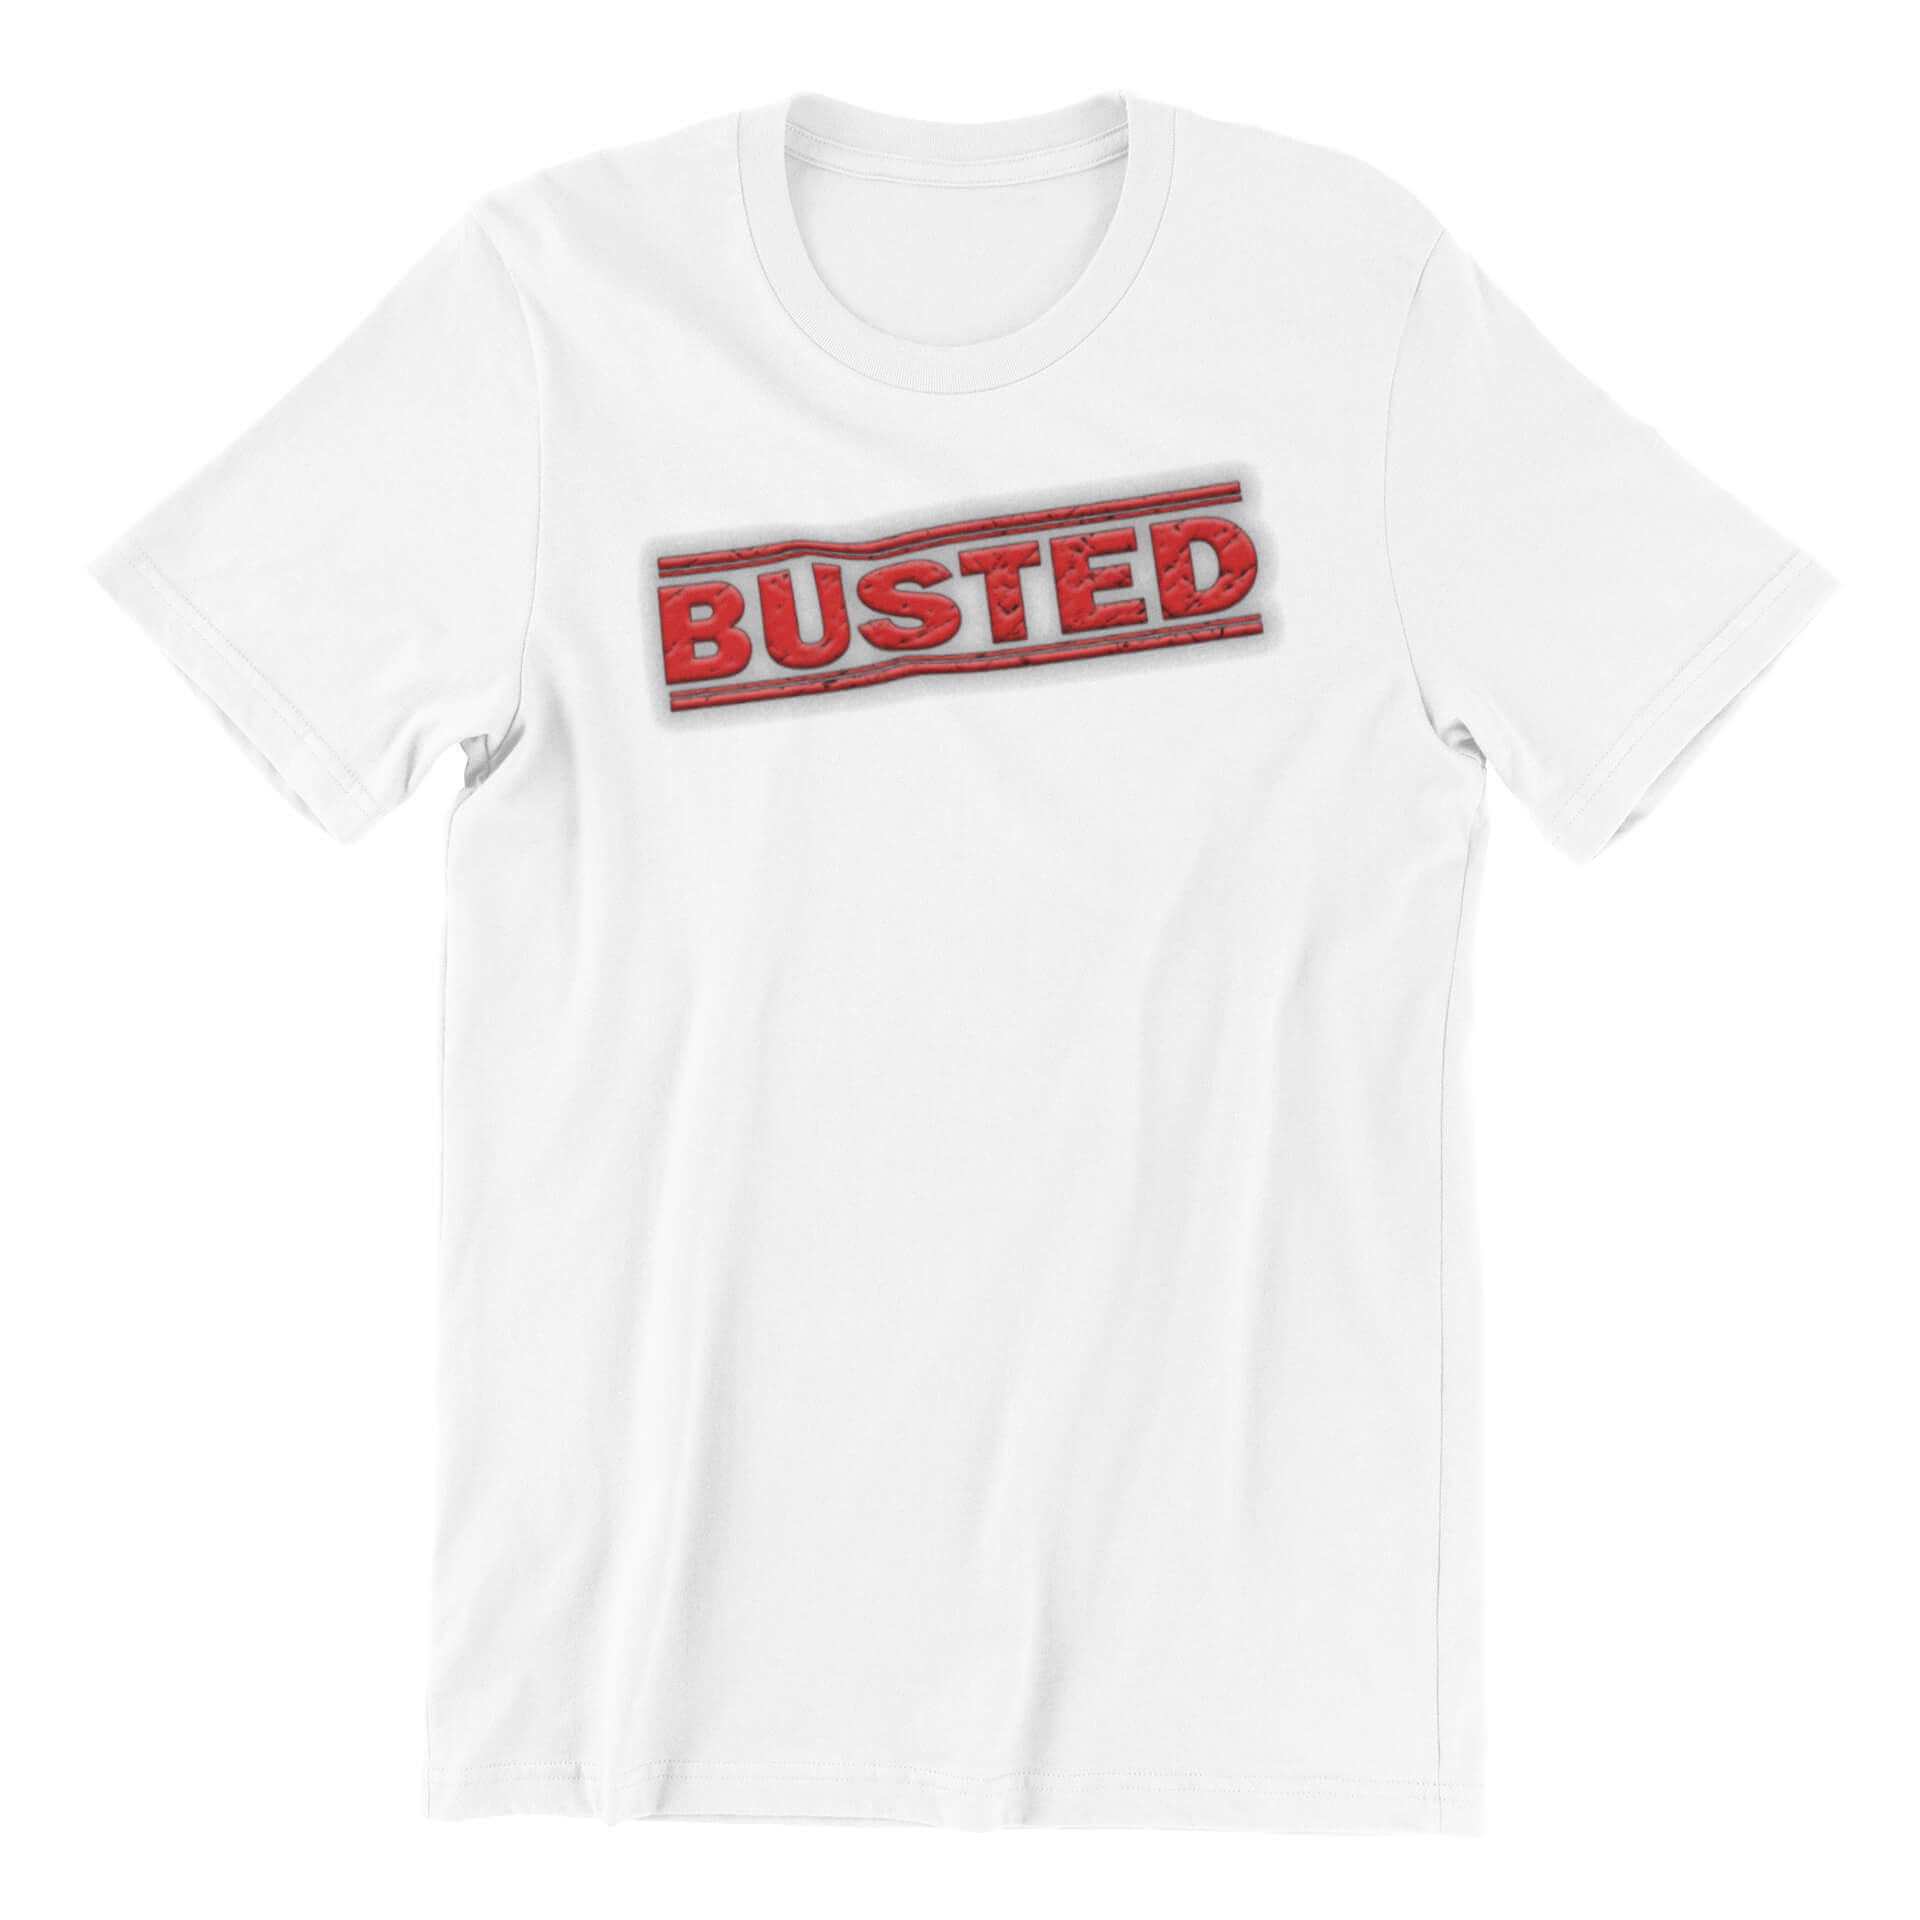 Busted T-Shirt